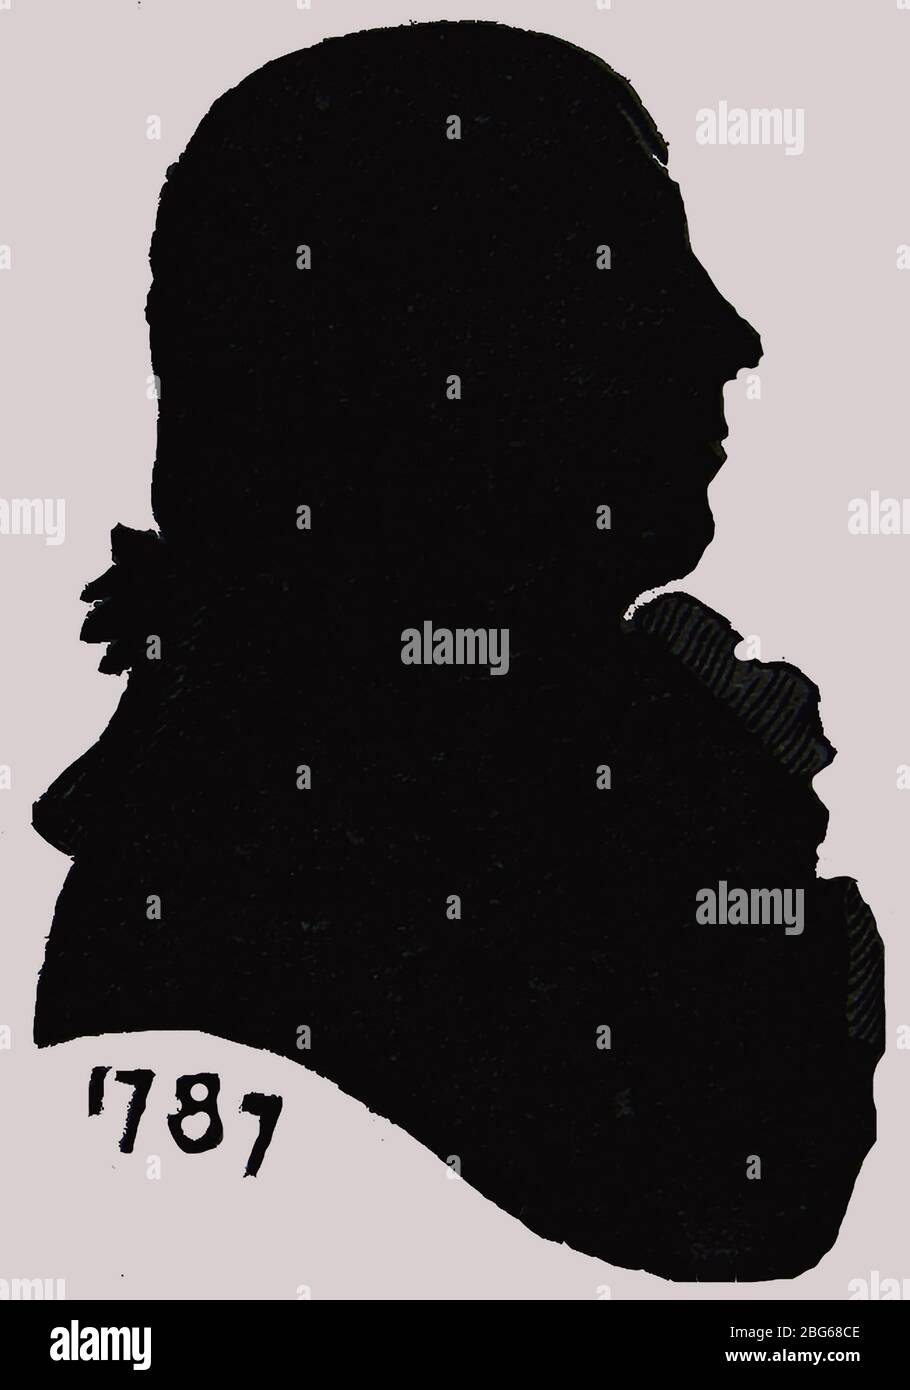 A silhouette drawn from life of Robert Burns (1759 –  1796) cut in 1787. It is said to be a 'true likeness'.Burns was also known as the National Bard, Bard of Ayrshire and the Ploughman Poet. He is the best known of the poets who have written in the Scots language and Scottish dialect, His most well known songs and poems, often performed at Hogmanay (31st December)  include - 'Auld Lang Syne', 'Scots Wha Hae', 'Tam o' Shanter' and  (my love is like) 'A Red, Red Rose'. Burns was a Freemason. Scots around the world celebrate Burn's Night on the anniversary of his birth, 25th January. Stock Photo